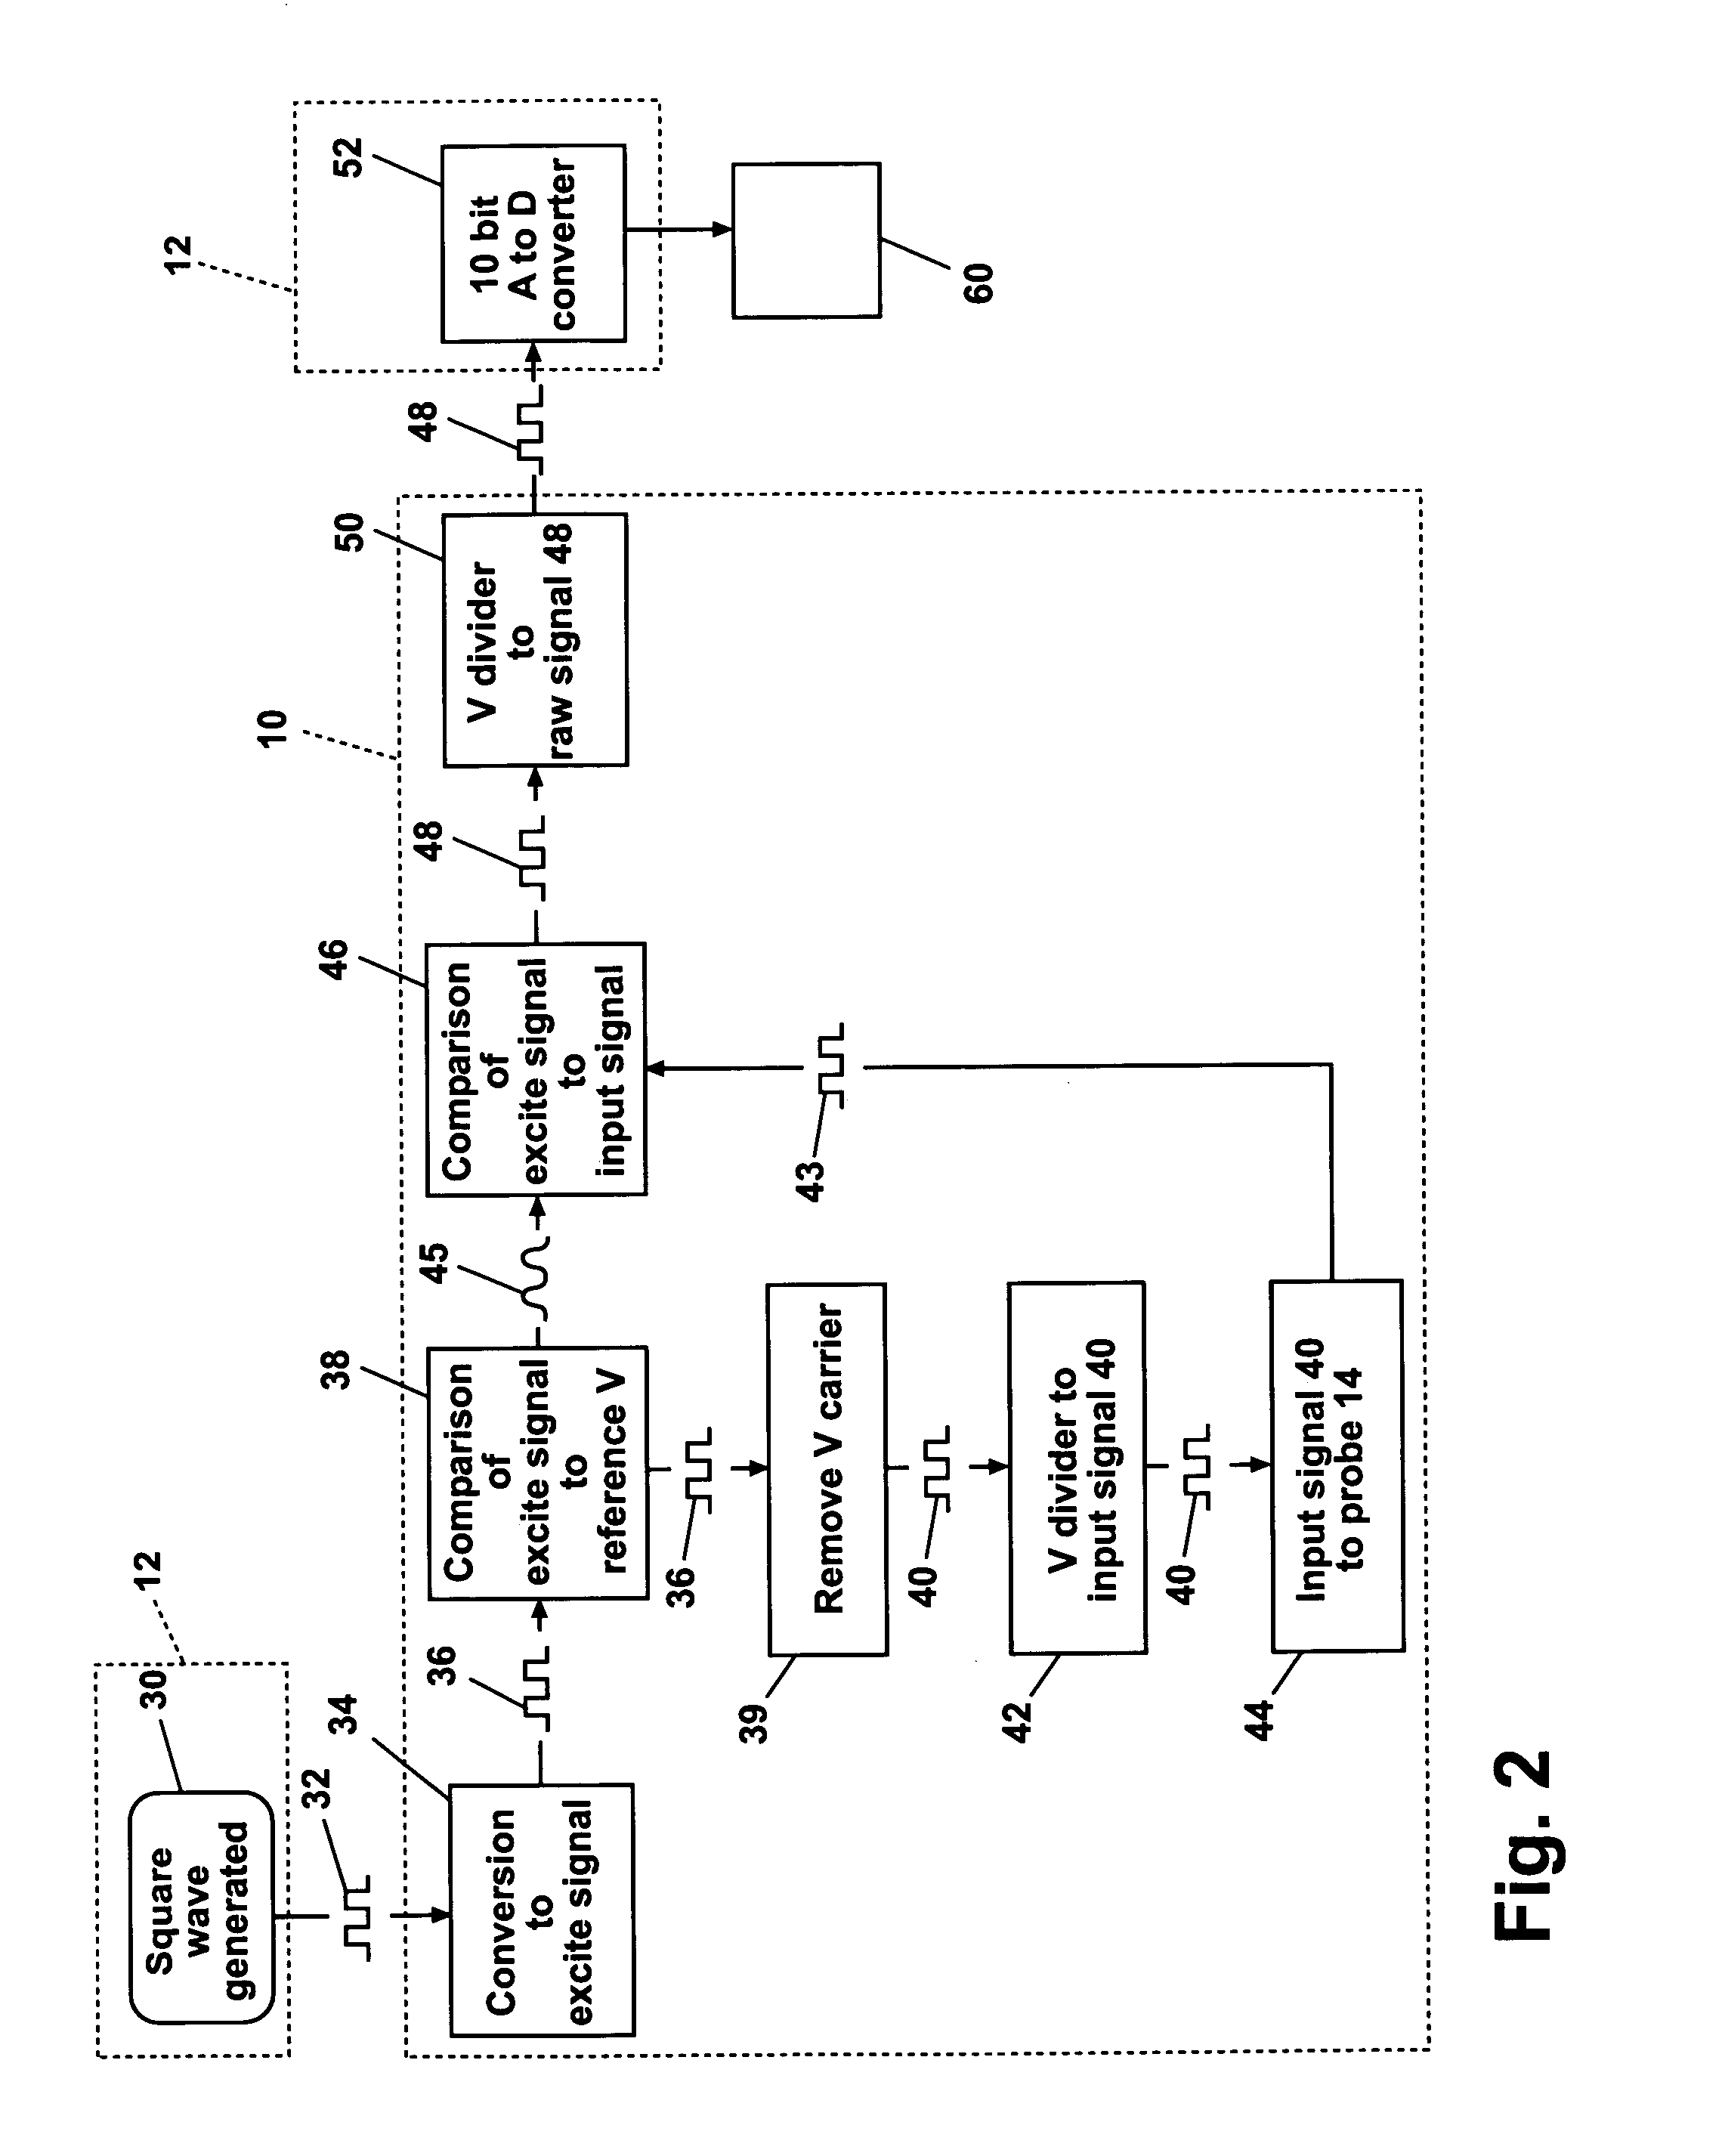 Water conductivity monitoring circuit for use with a steam generator